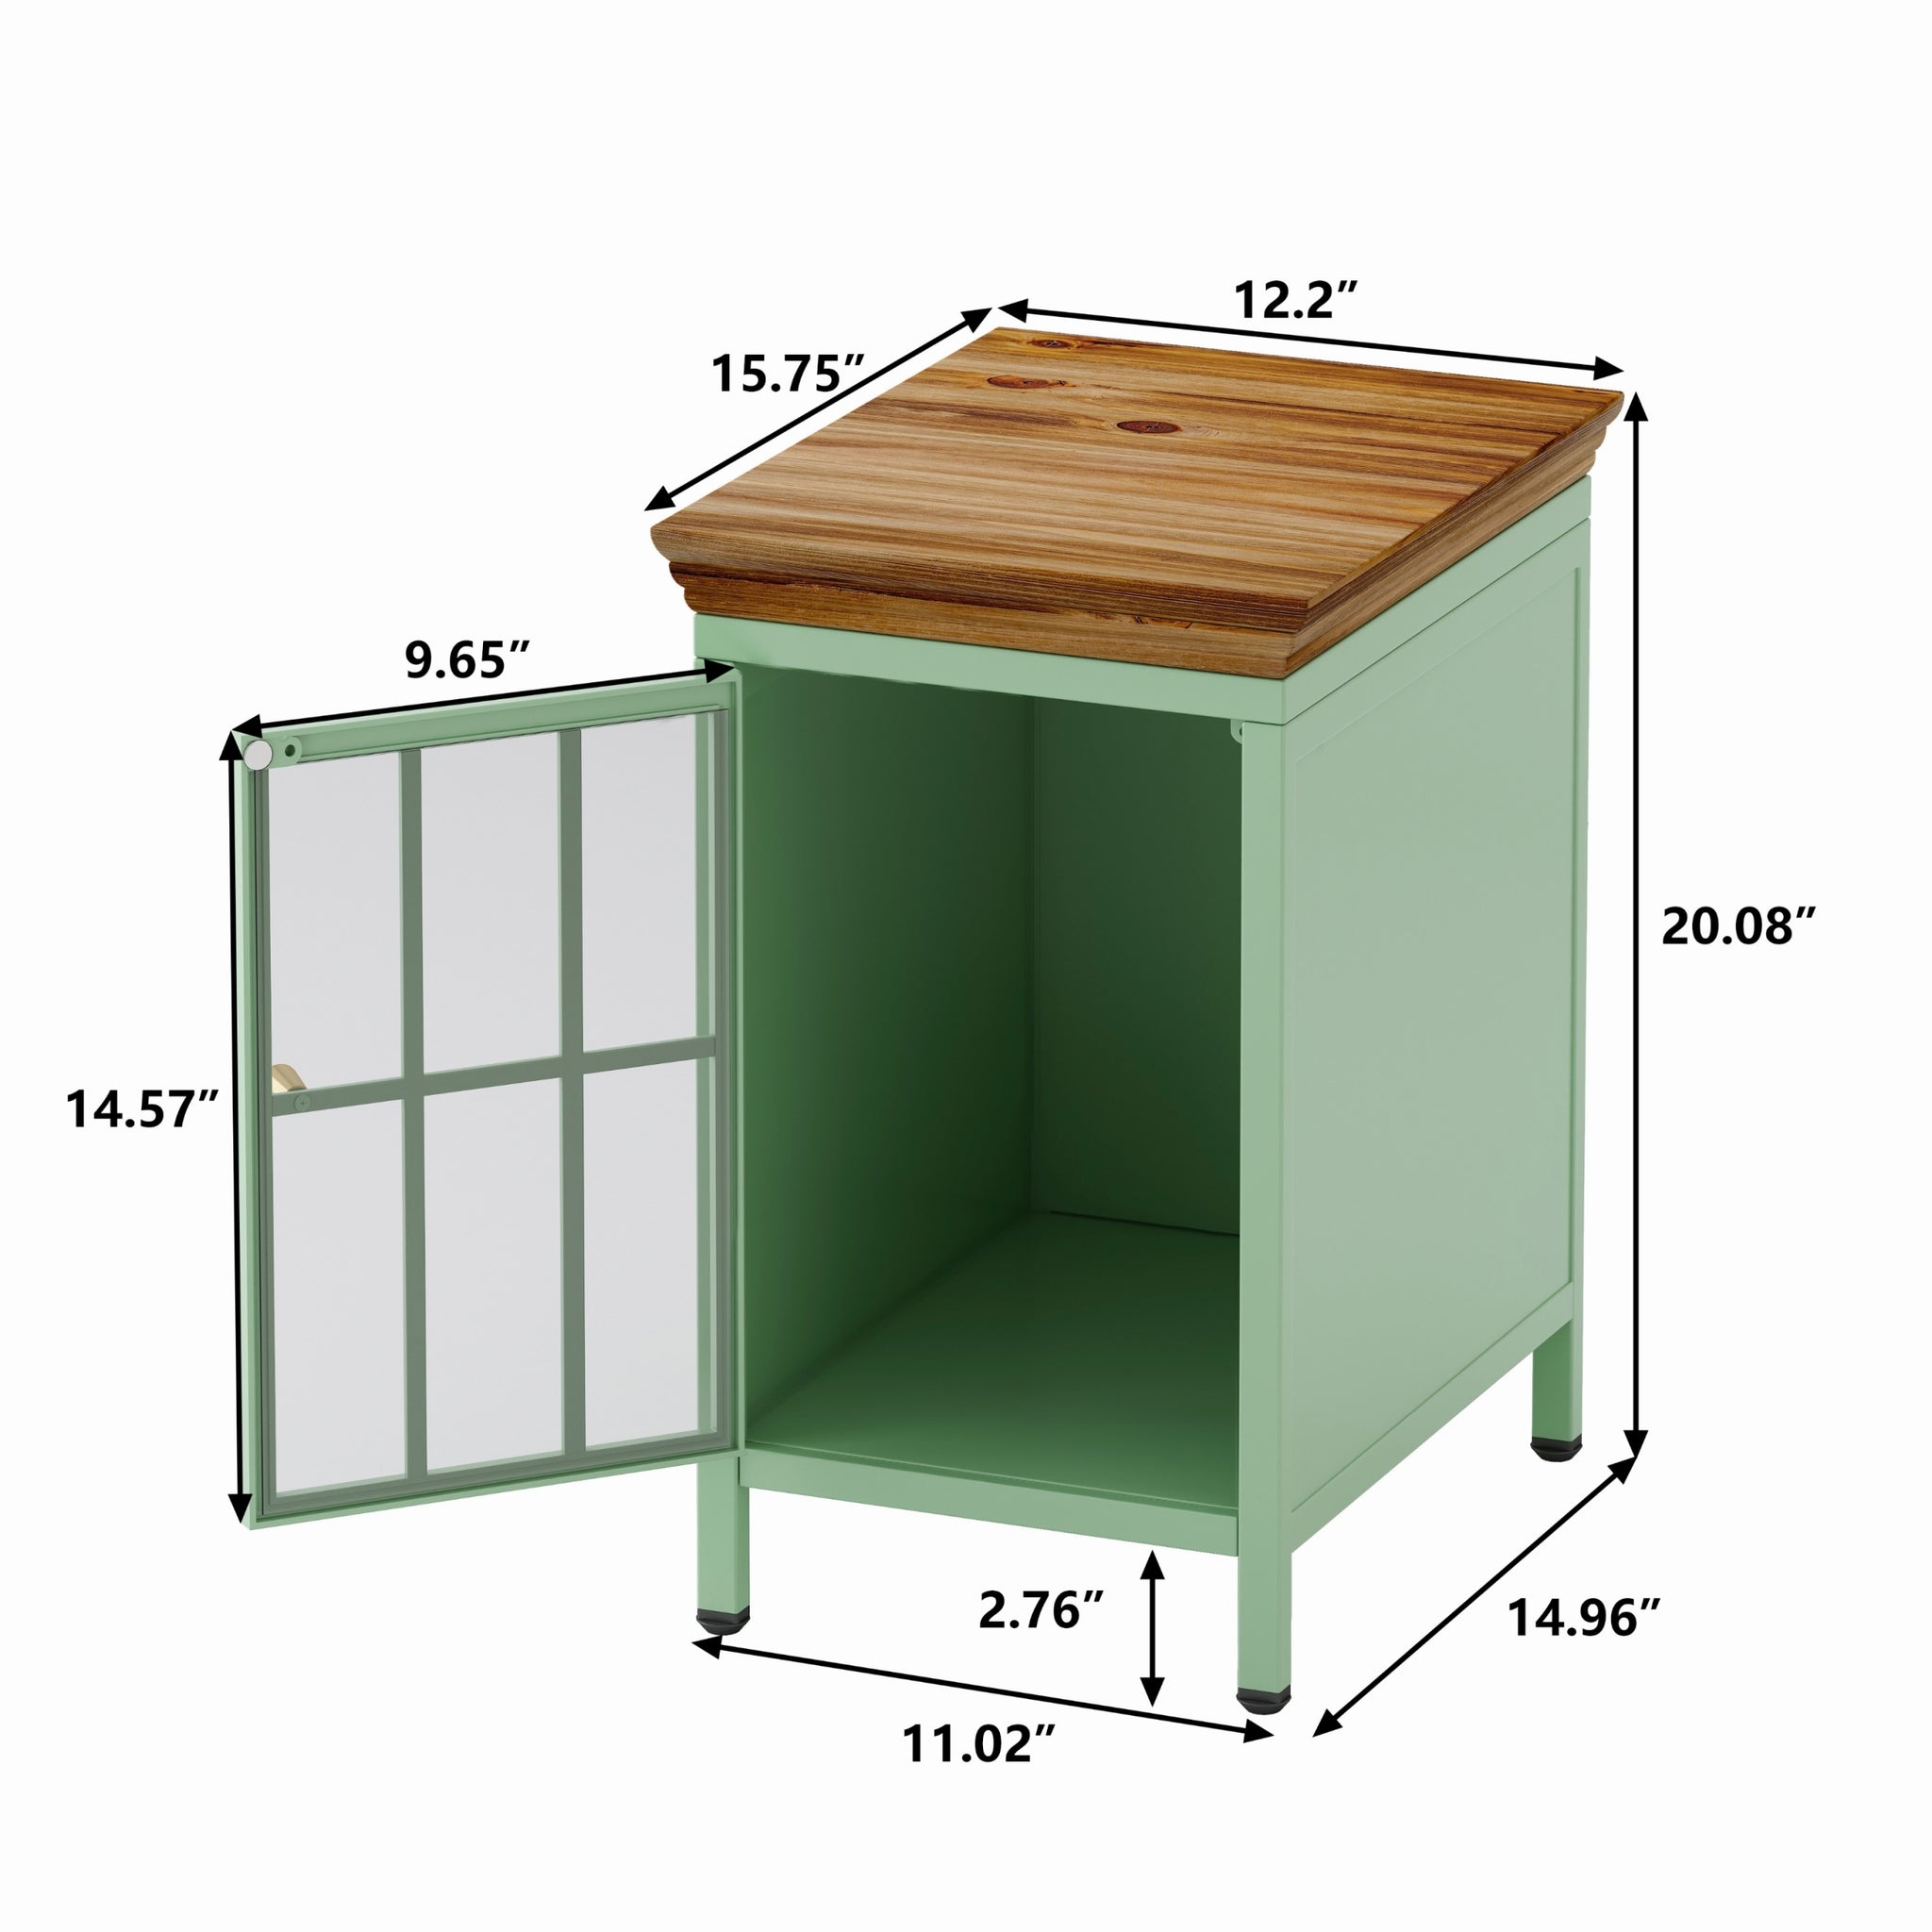 Nightstand with Storage Cabinet & Solid Wood Tabletop green-iron